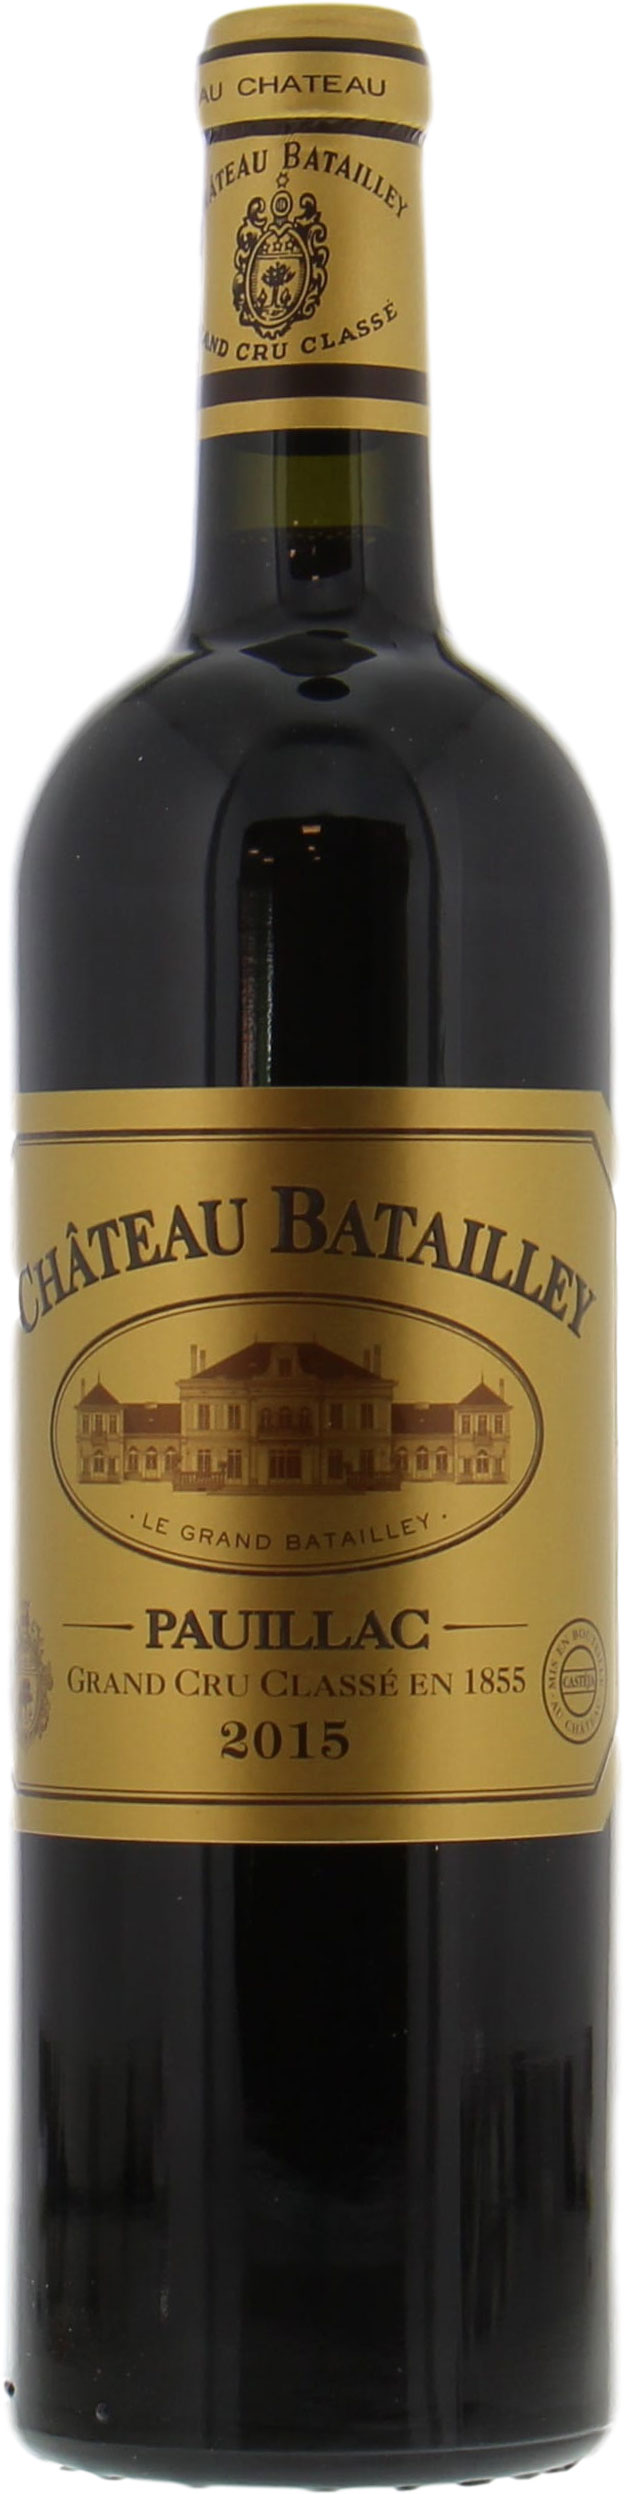 Chateau Batailley - Chateau Batailley 2015